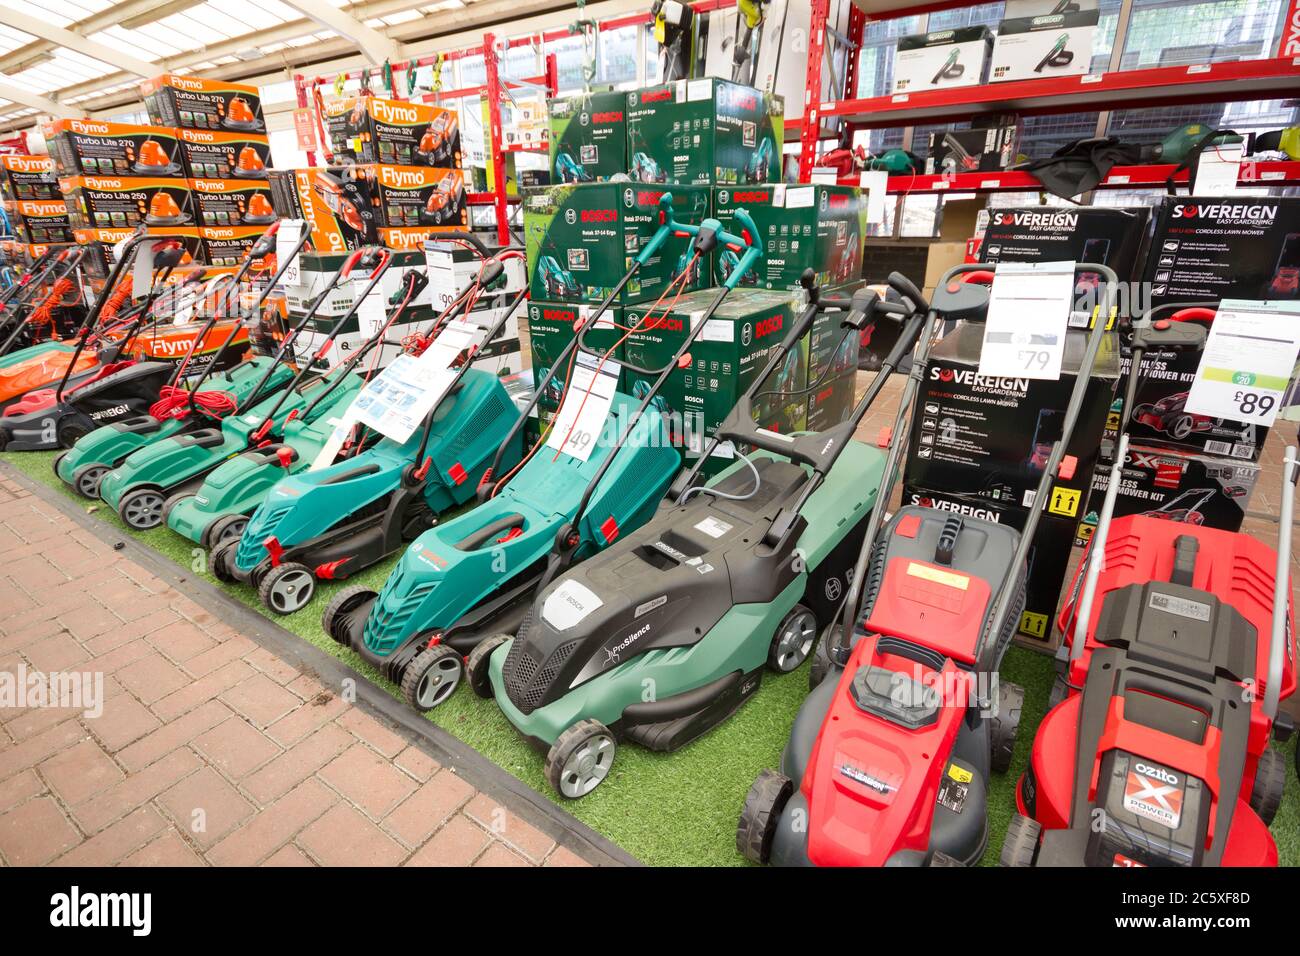 Sovereign Lawn Mower  on  display in Garden center in Kent, England Stock Photo